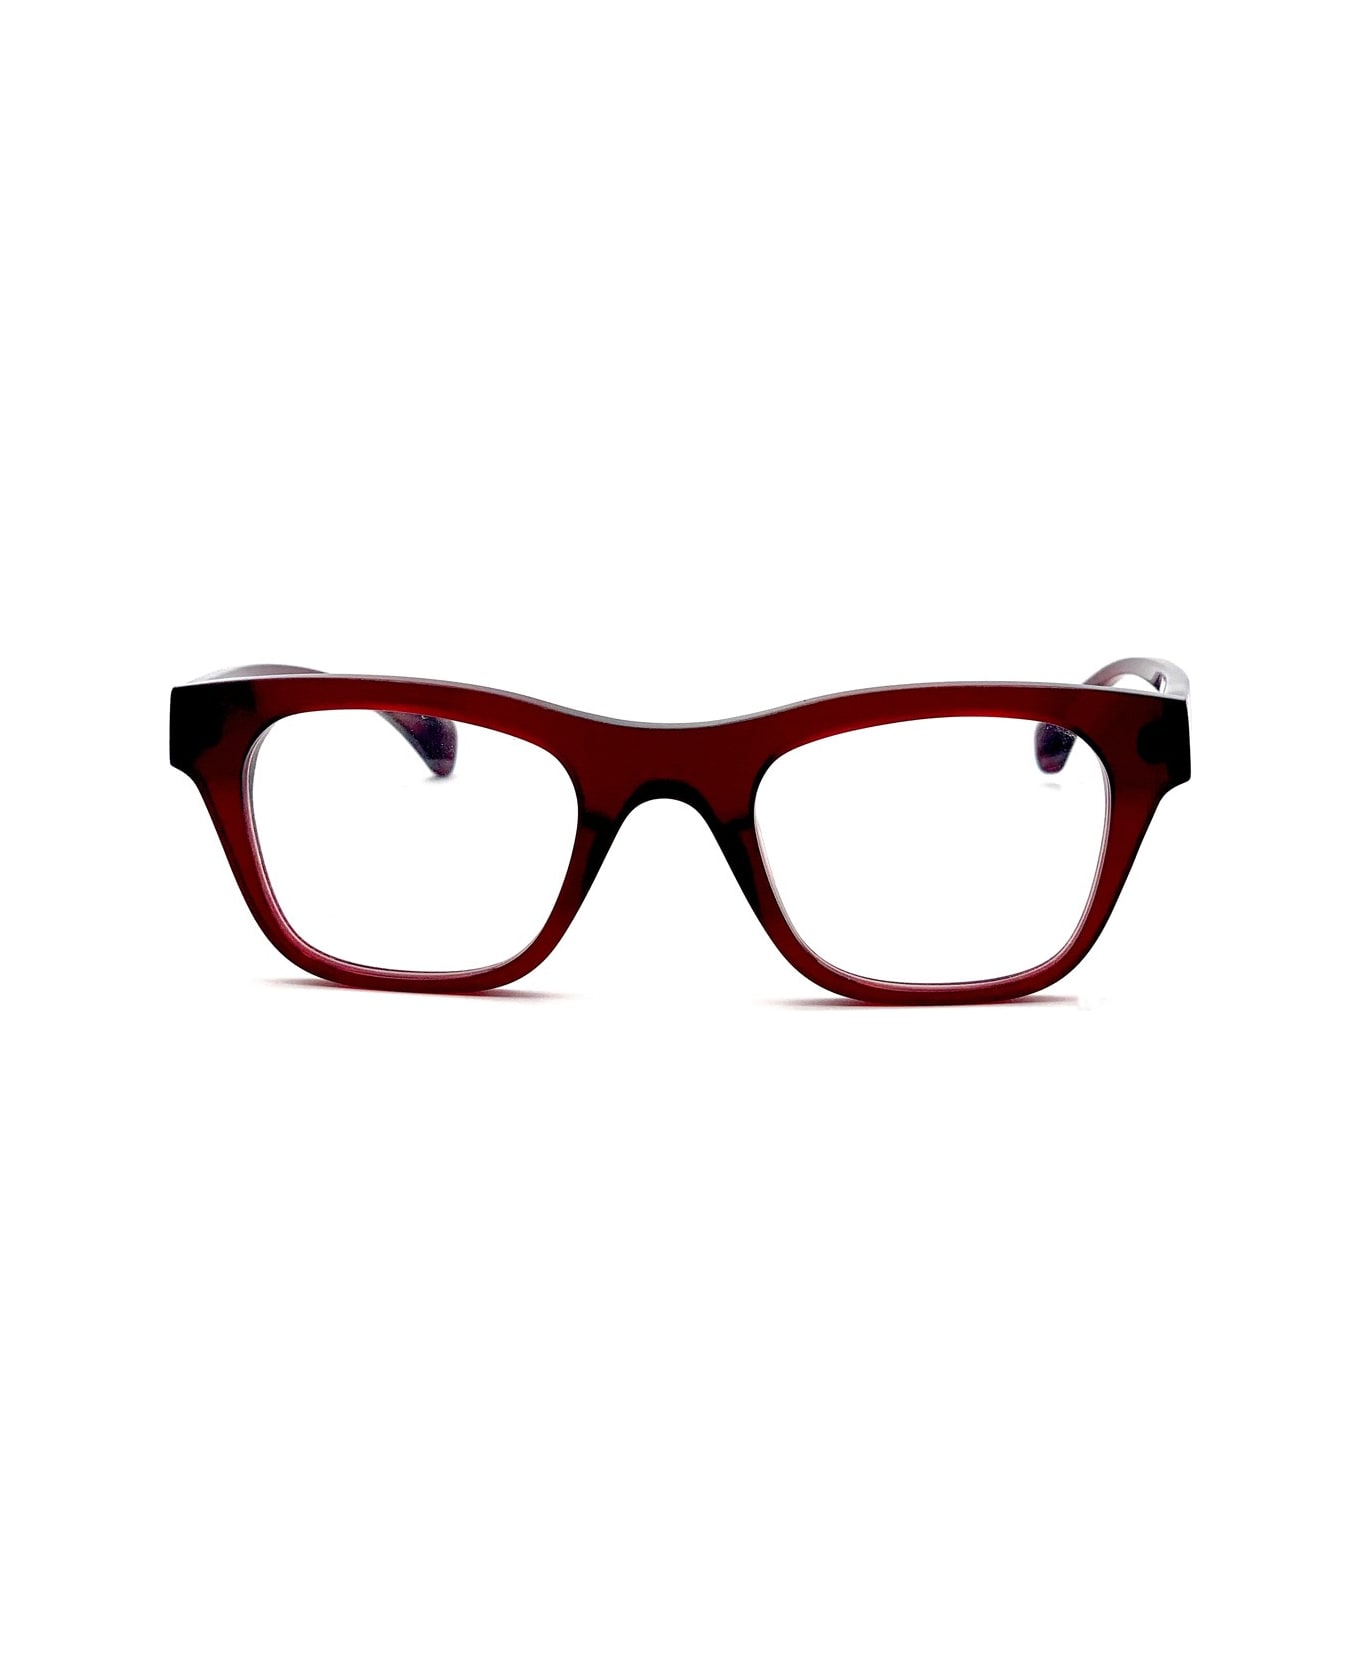 Jacques Durand Madere Xl 101 Glasses - Rosso